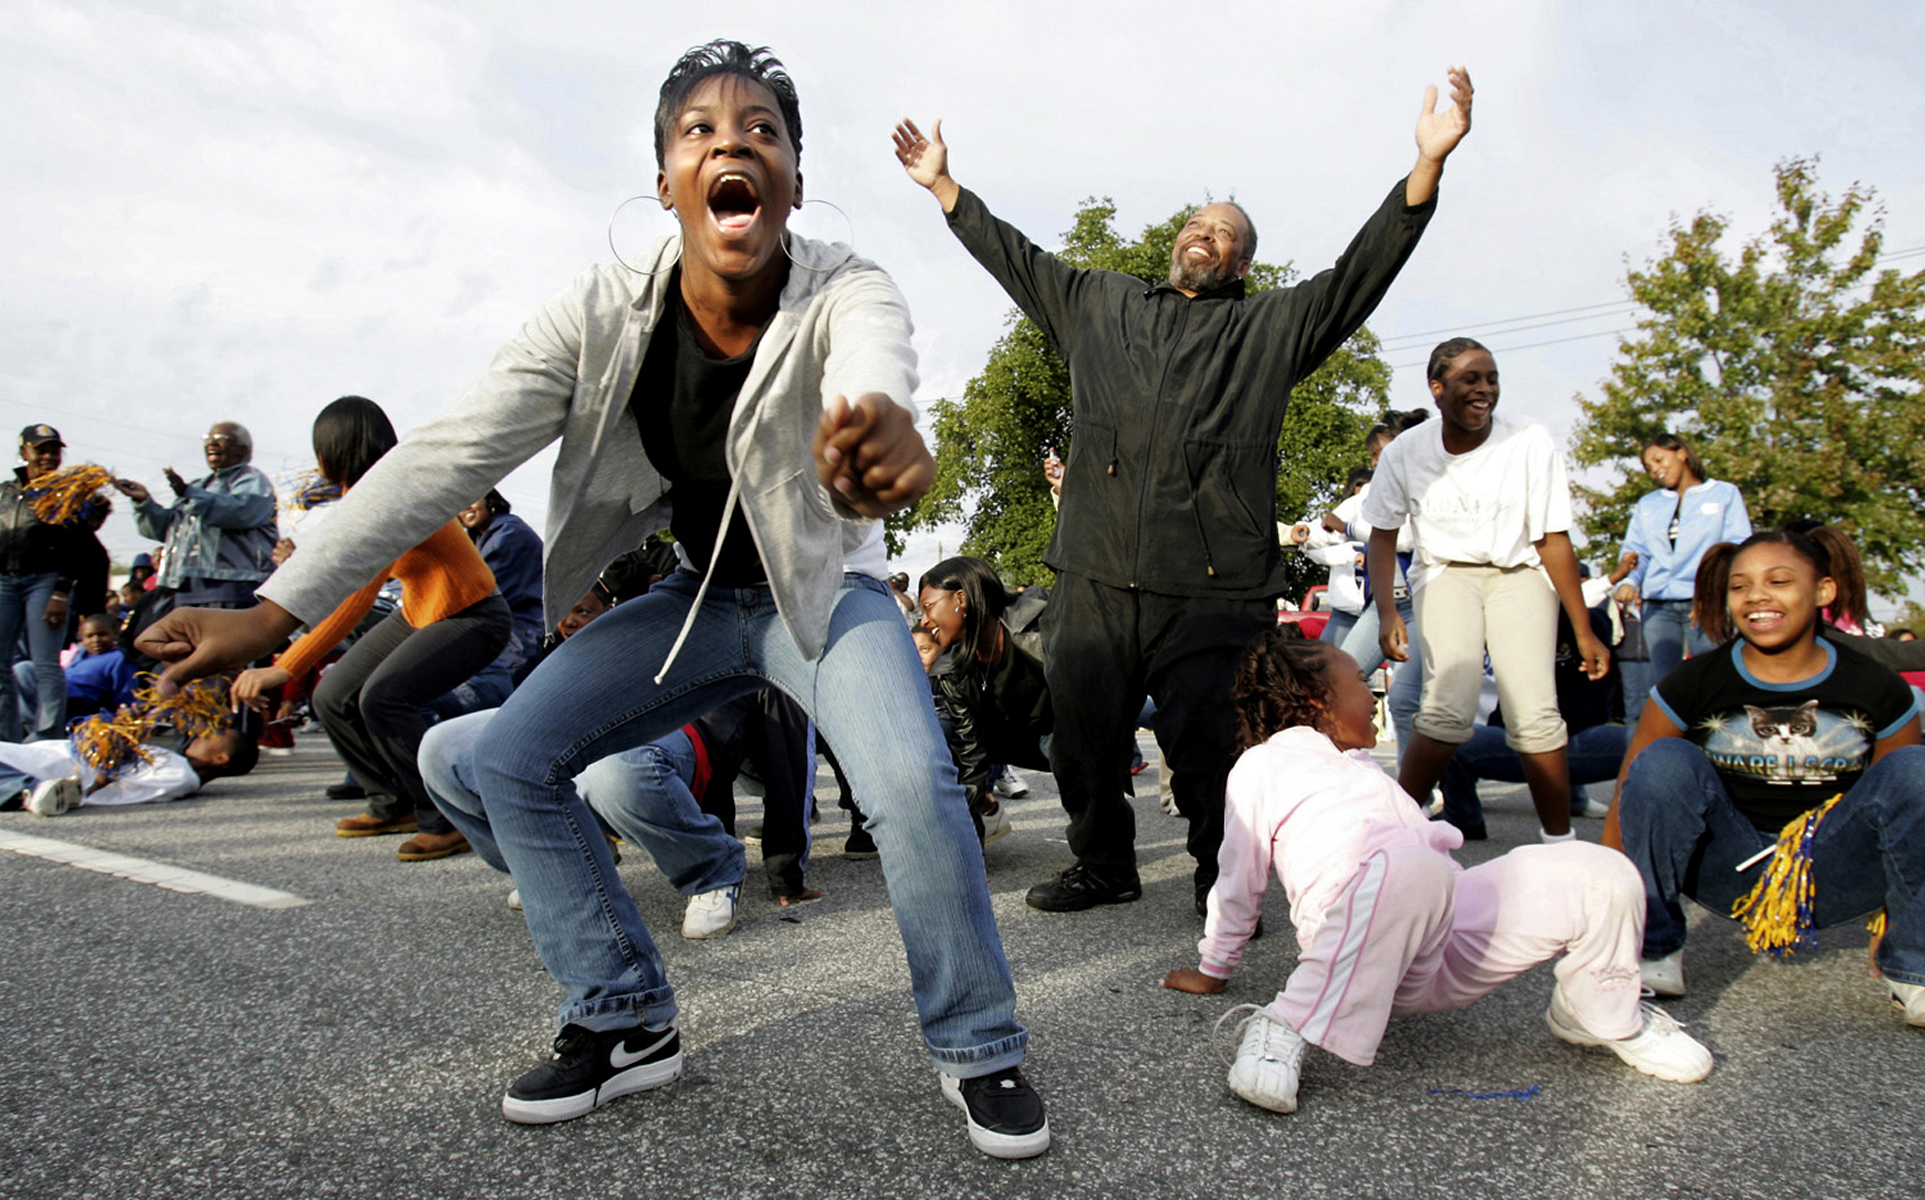 Brittany Davis and Len McCollum (arms raised) dance to the Cha-Cha Slide in an attempt to win free football game tickets before the A&T Homecoming Parade in downtown Greensboro, N.C.